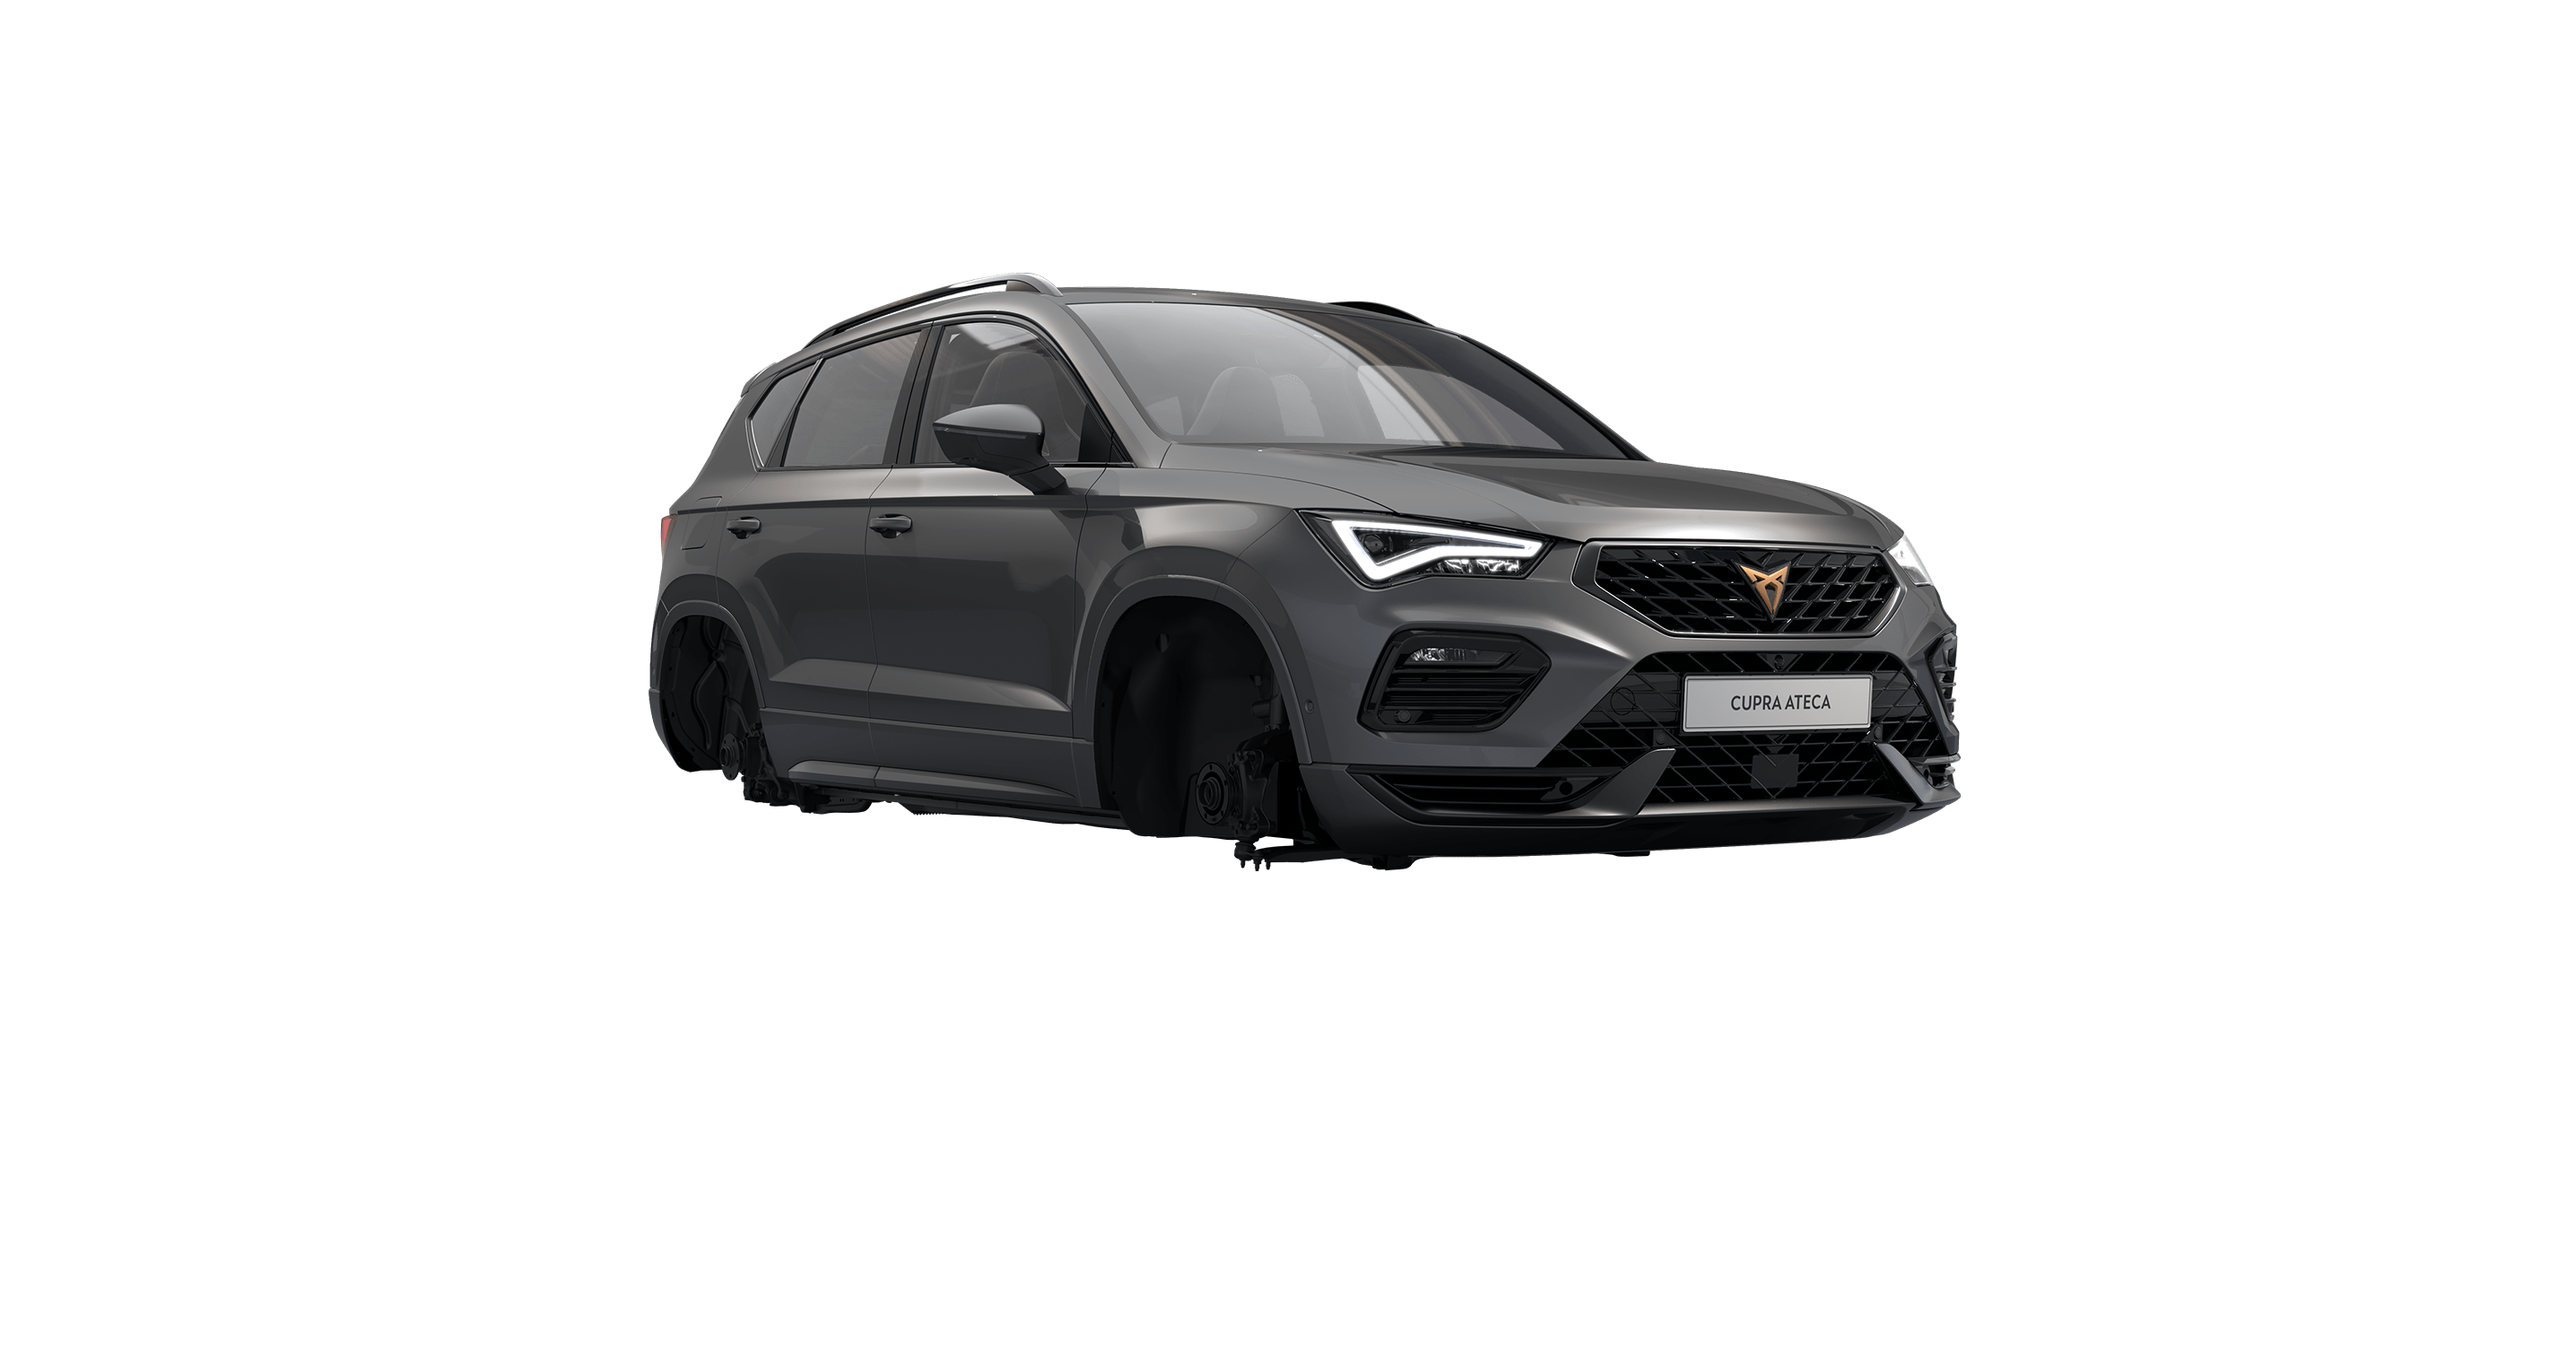 JE Design boosts the Cupra Ateca to 360 horsepower at an affordable price 